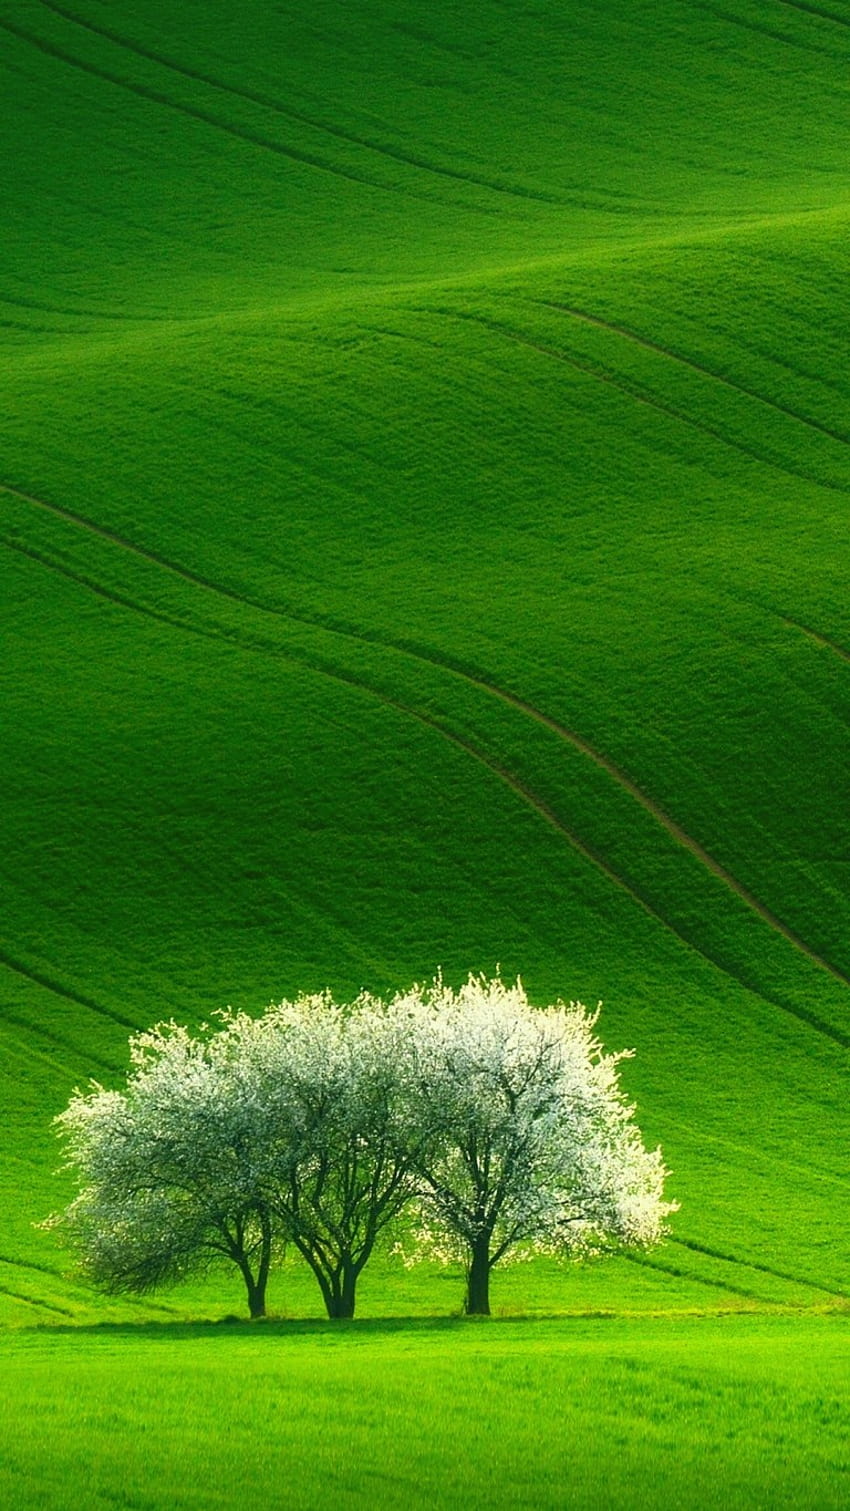 Green Beautiful Nature Scenery Android, cool green nature HD phone wallpaper